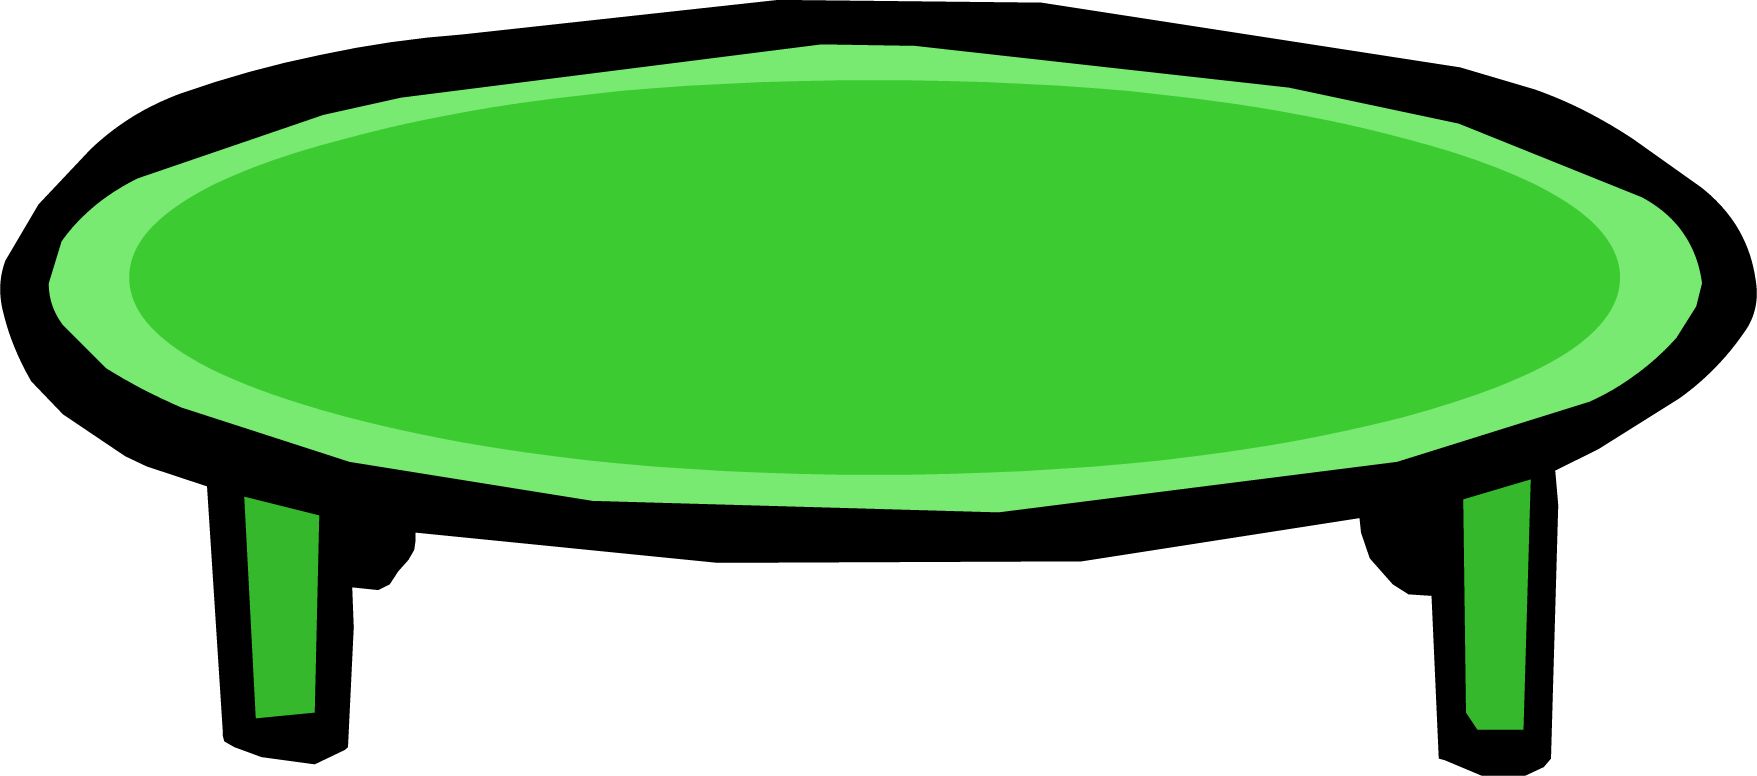 Green Oval Table Clipart PNG